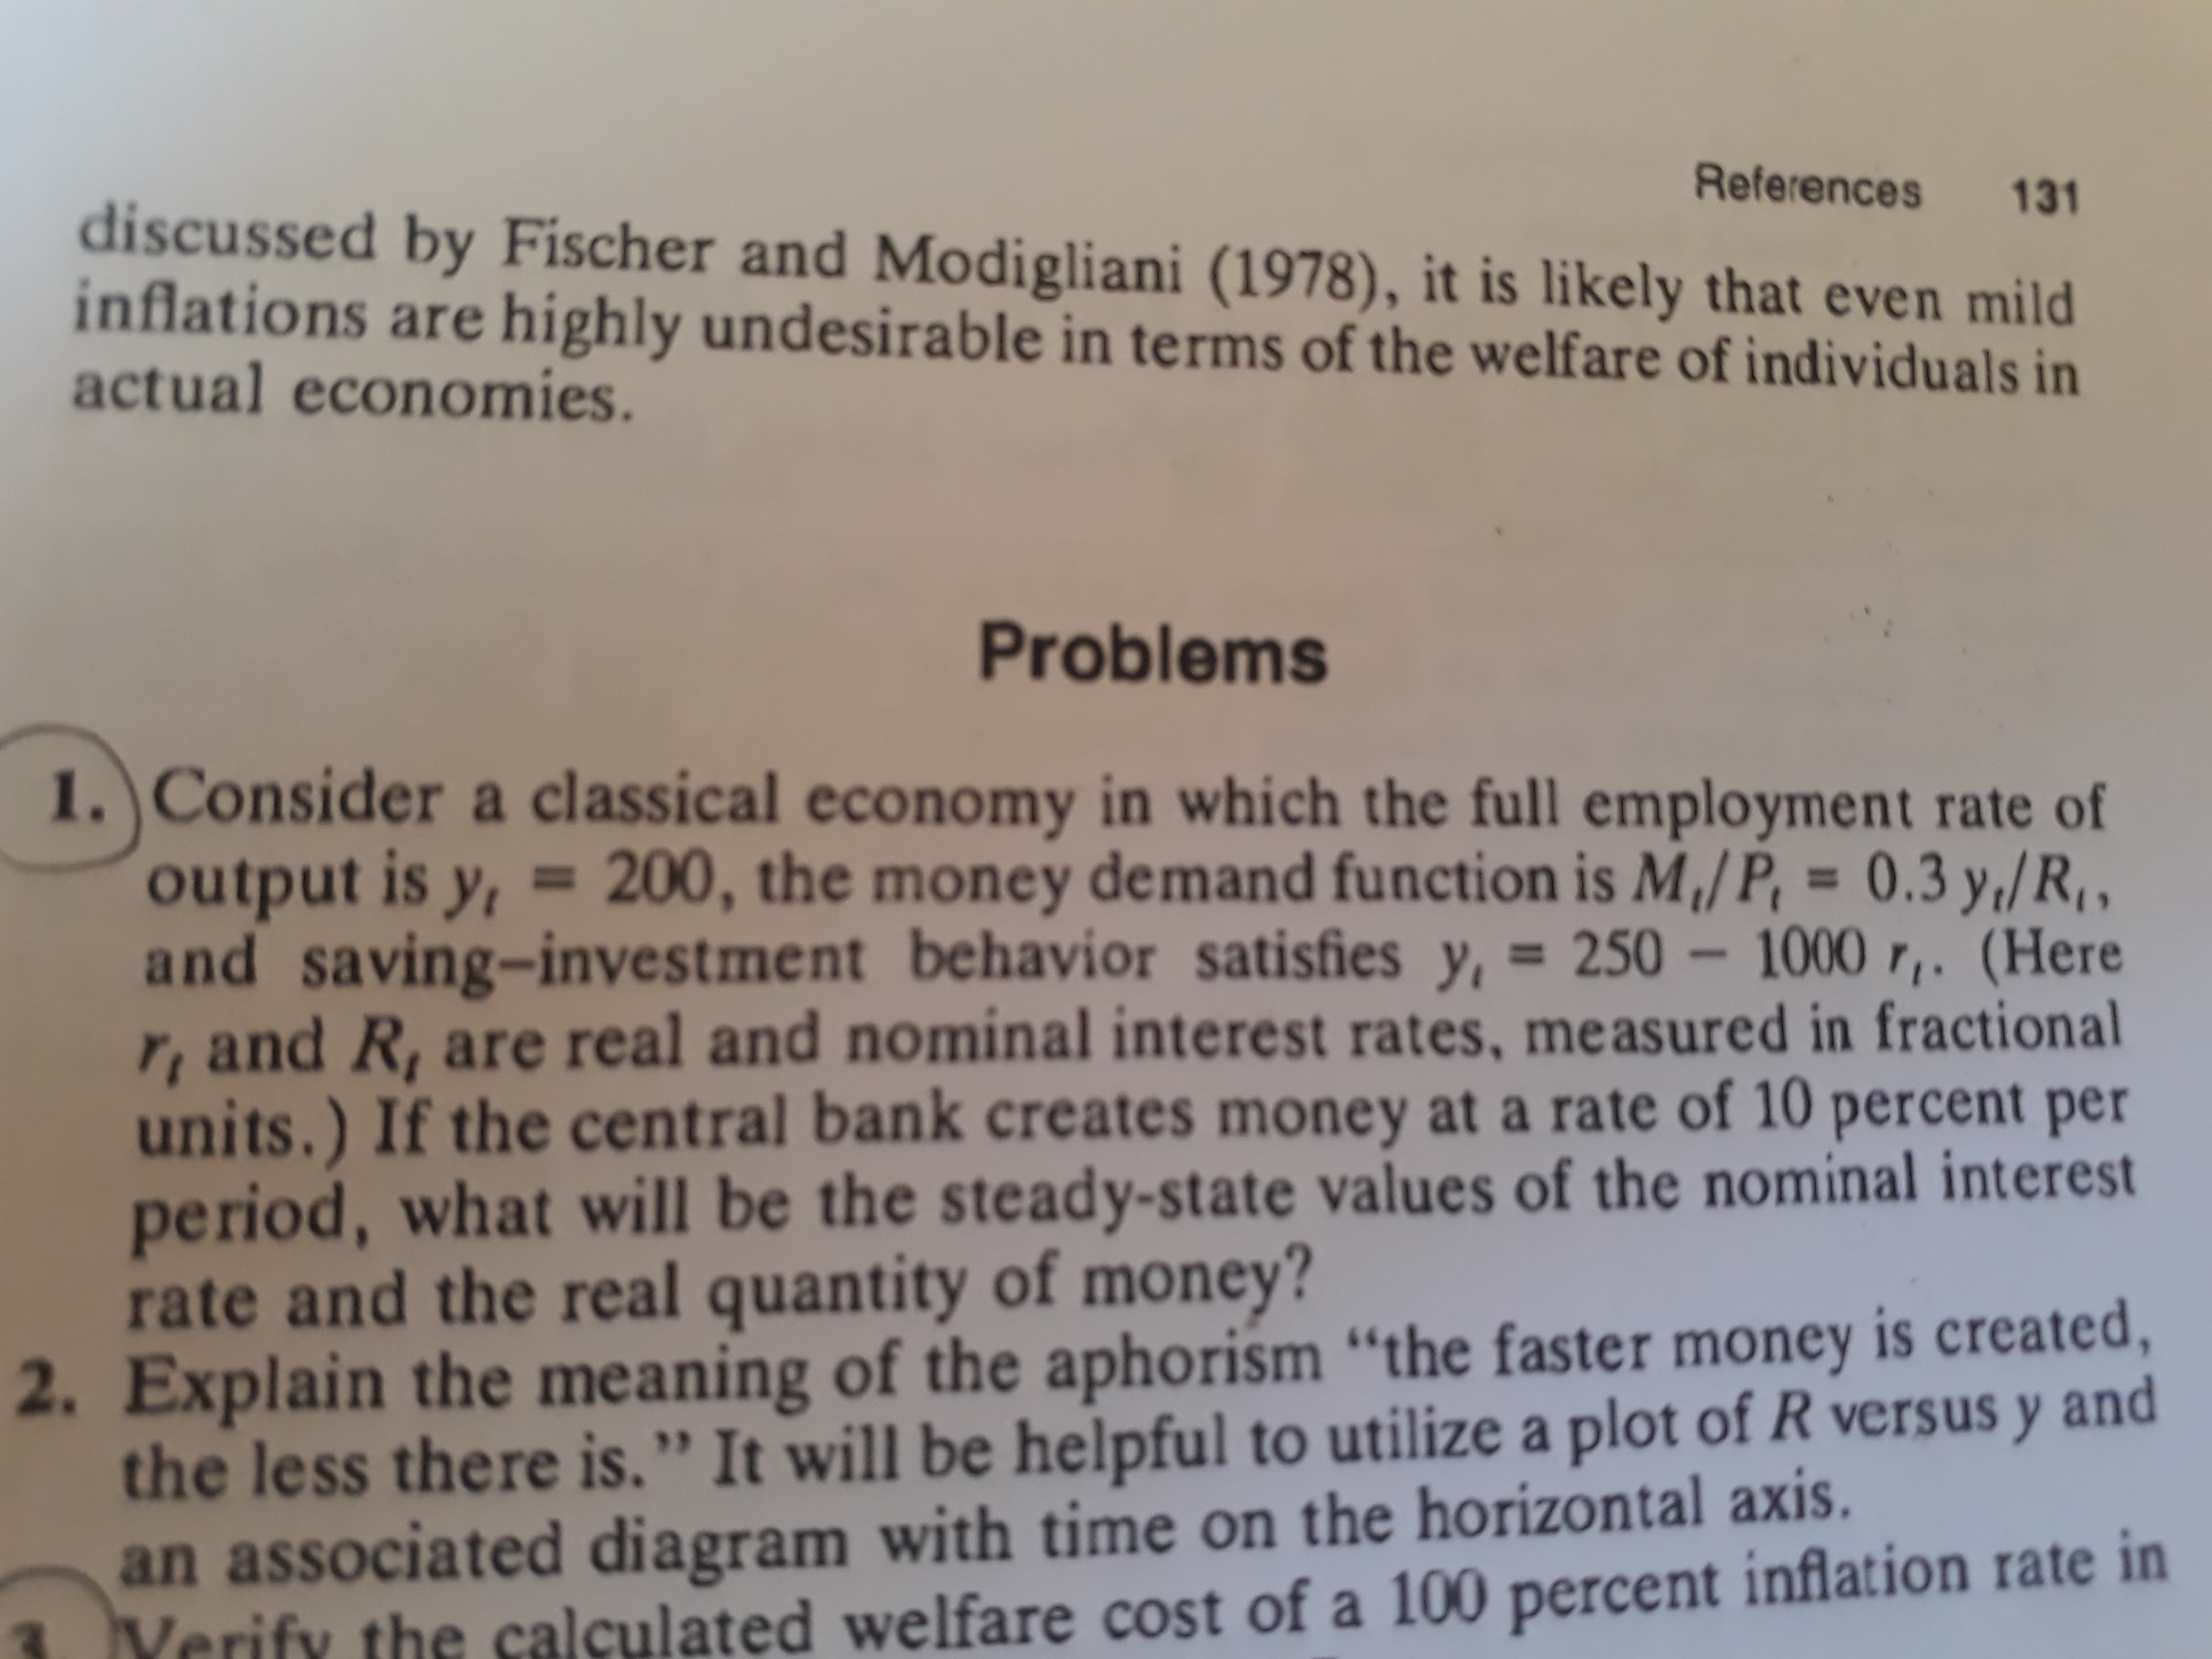 Consider a classical economy in which the full employment rate of
output is y, = 200, the money demand function is M,/P, = 0.3 y,/R, ,
and saving-investment behavior satisfies y, = 250 - 1000 r,. (Here
r, and R, are real and nominal interest rates, measured in fractional
units.) If the central bank creates money at a rate of 10 percent per
period, what will be the steady-state values of the nominal interest
rate and the real quantity of money?
%3D
%3D
Or money is created
